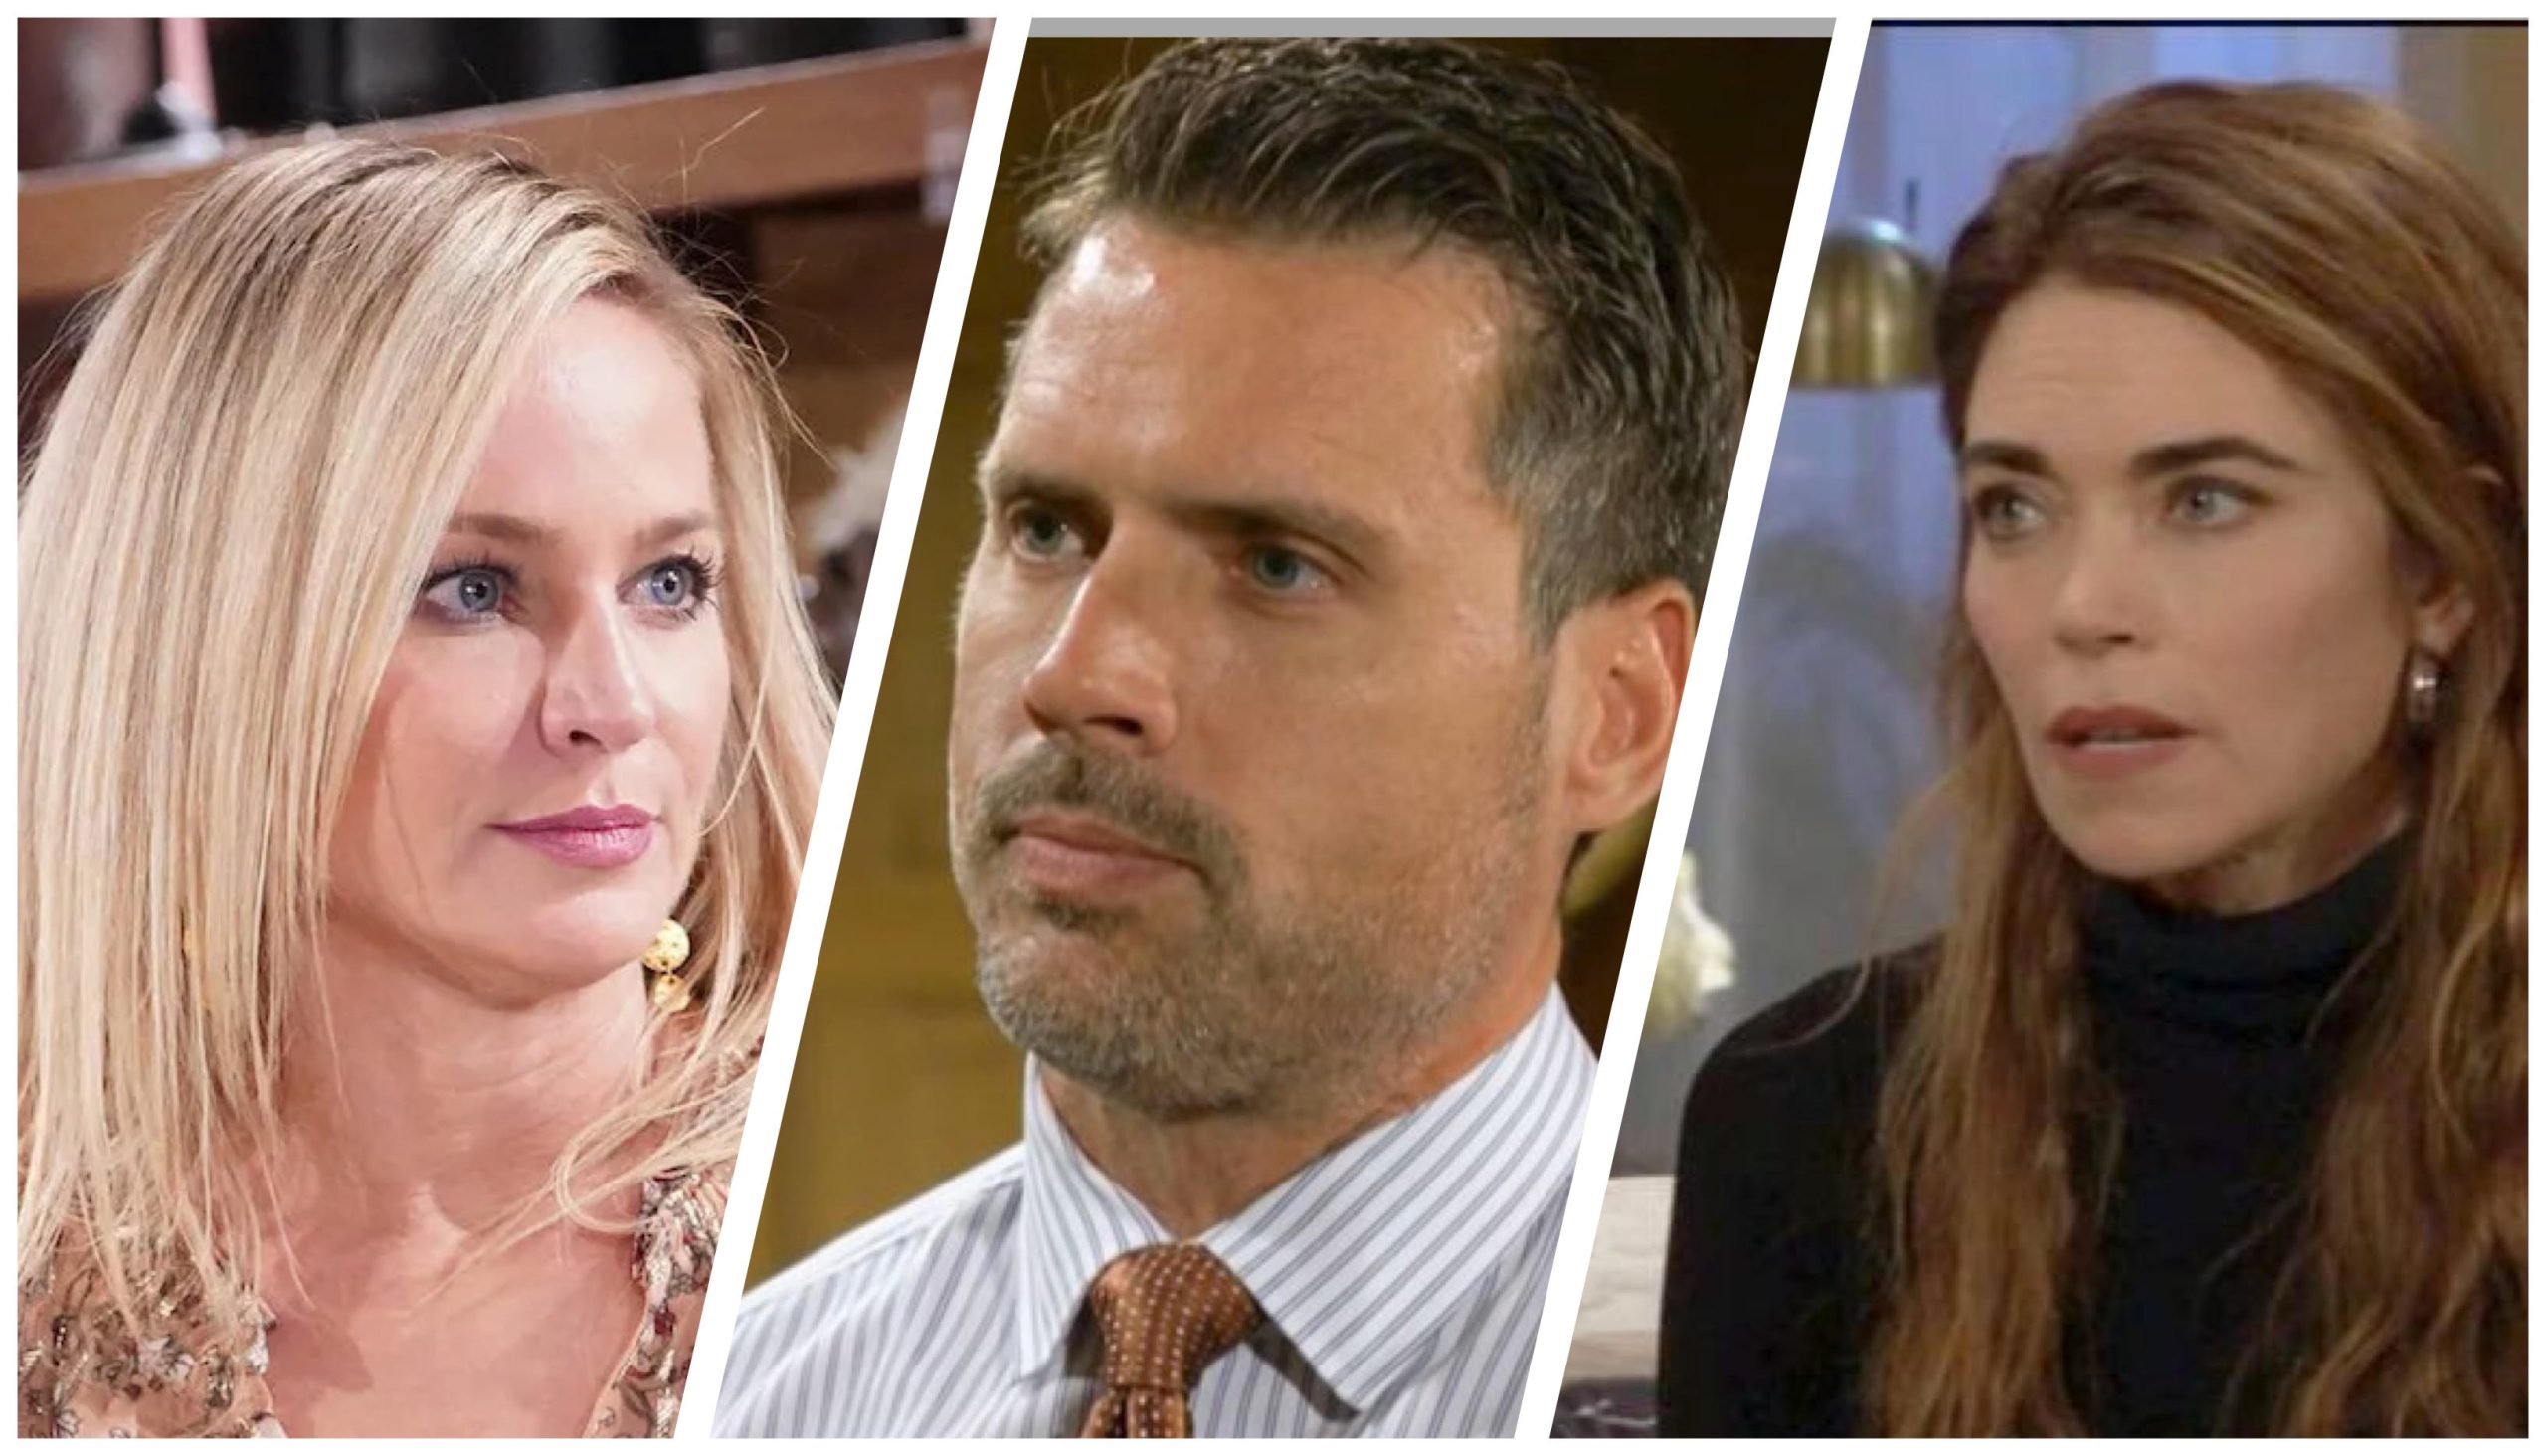 The Young and the Restless spoilers with Sharon hinting Victoria as Victors true target